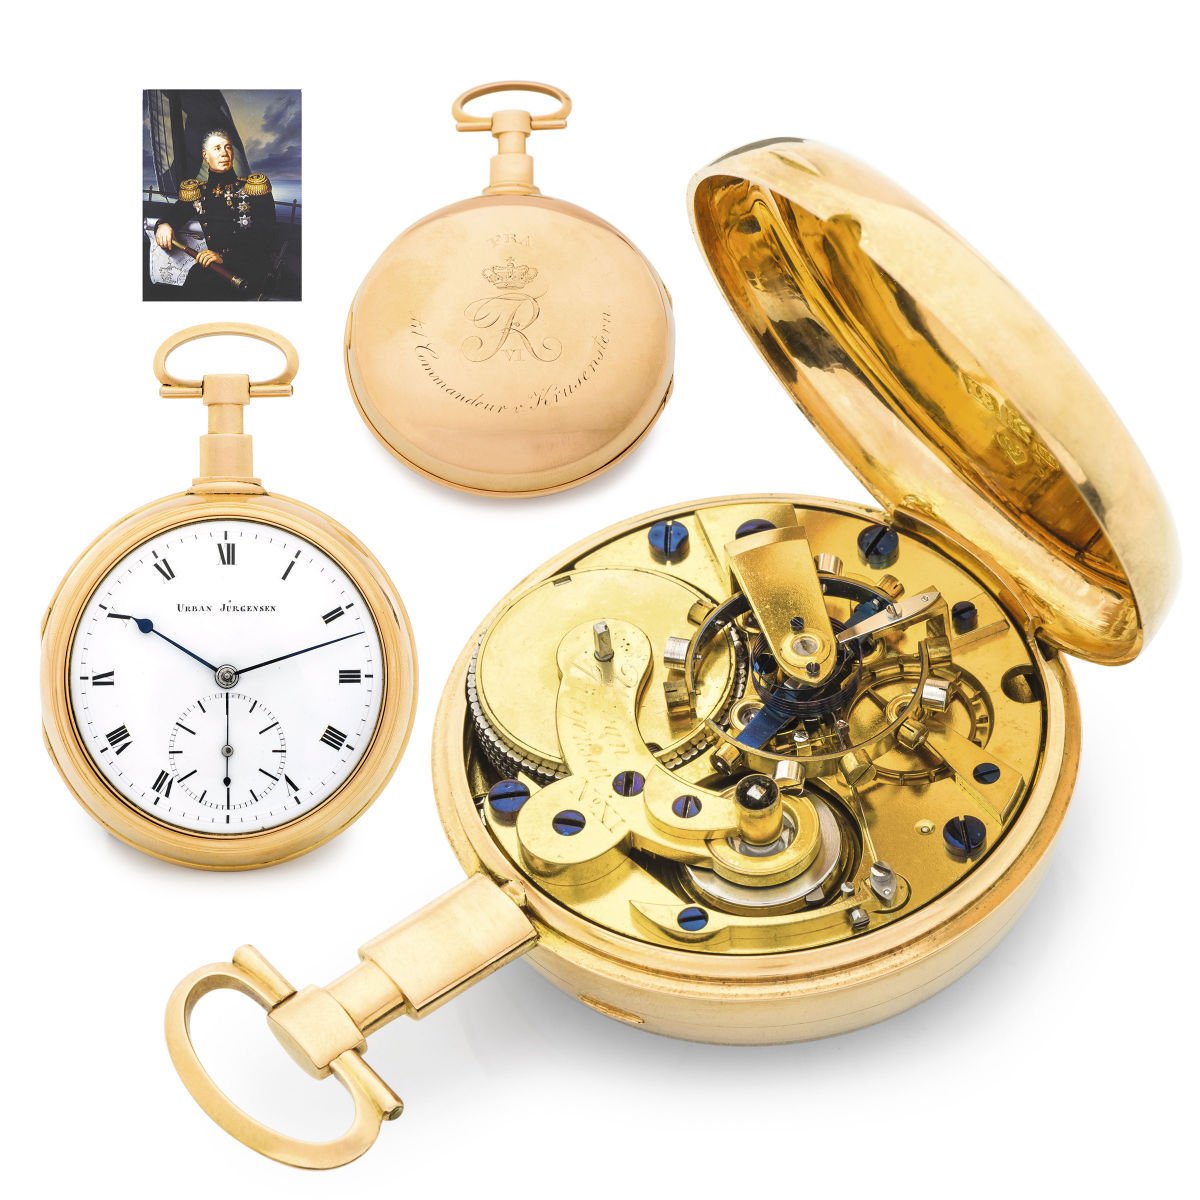 Rare pocket watch sells for 12 times 